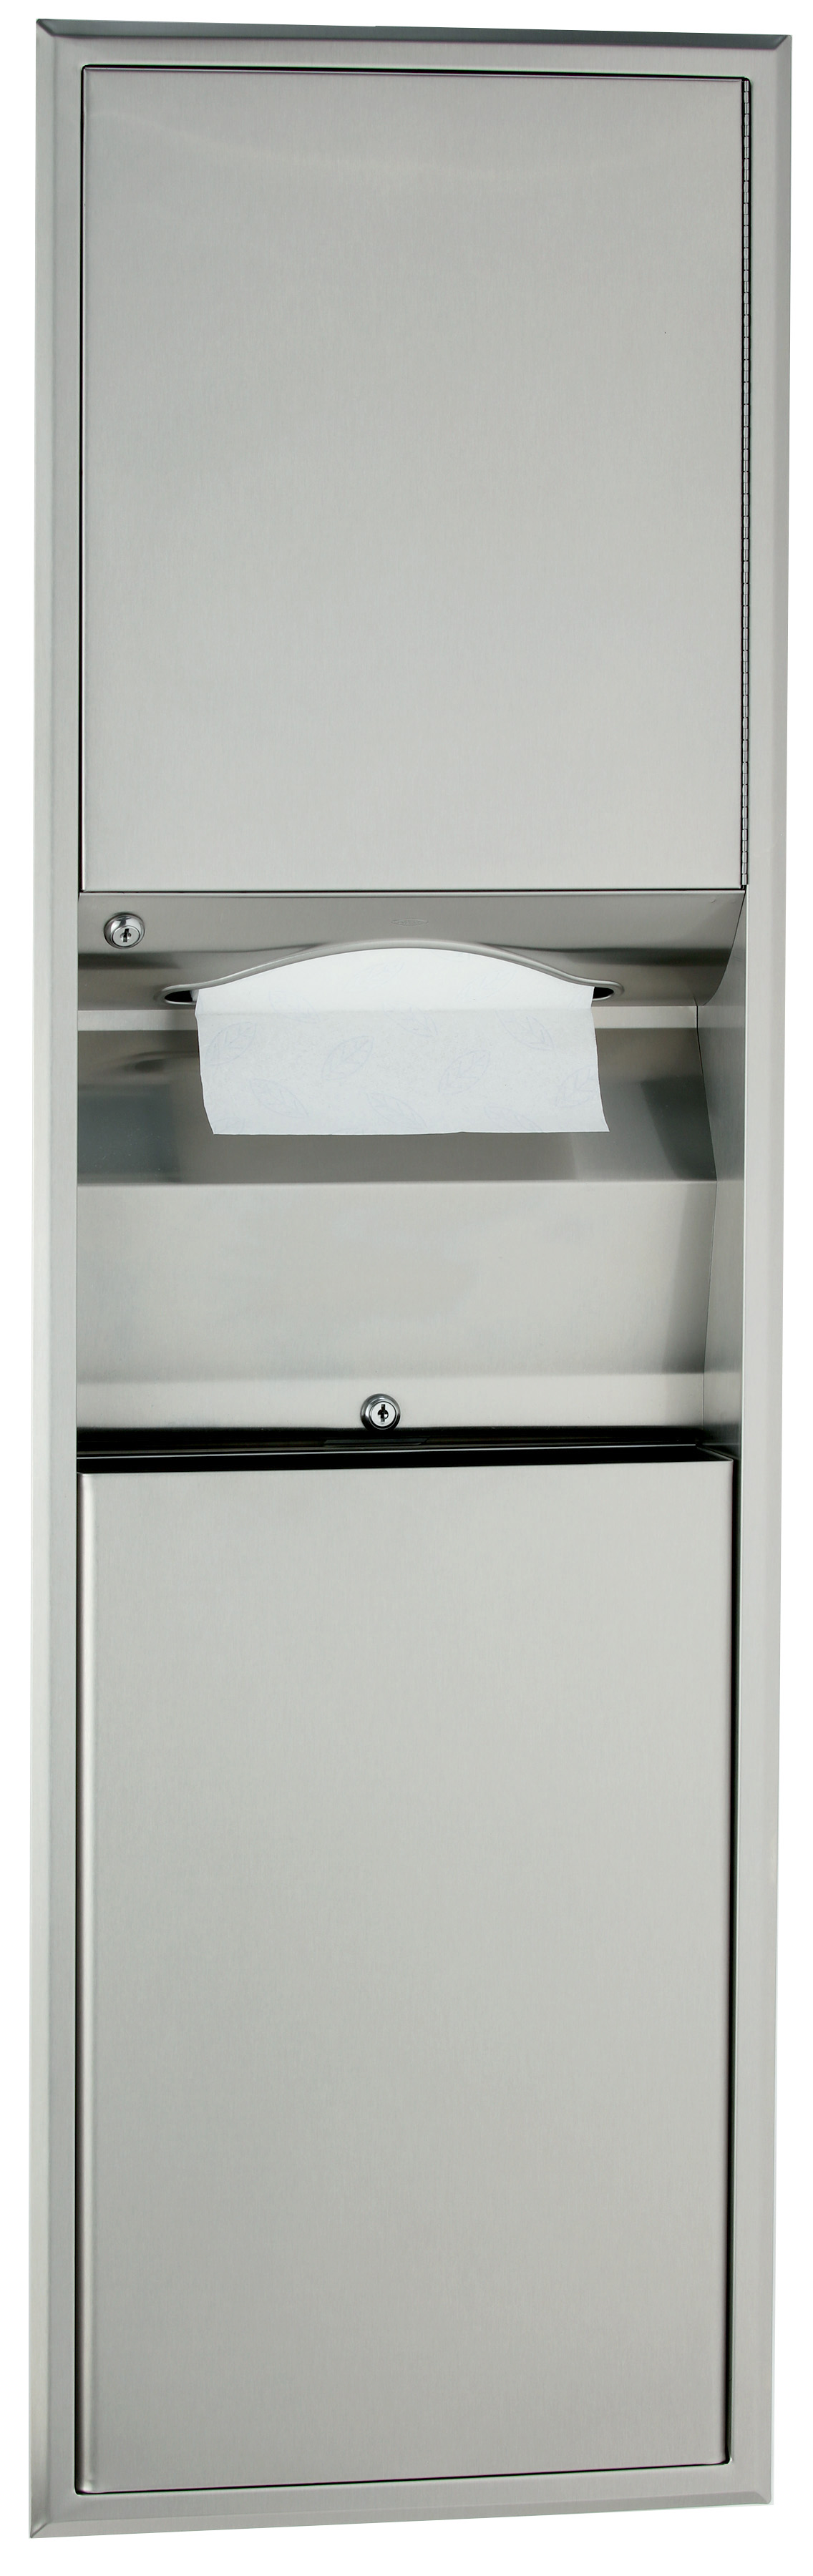 Bobrick 369 ClassicSeries 304 Stainless Steel Recessed Paper Towel Dispenser 2 for sale online 